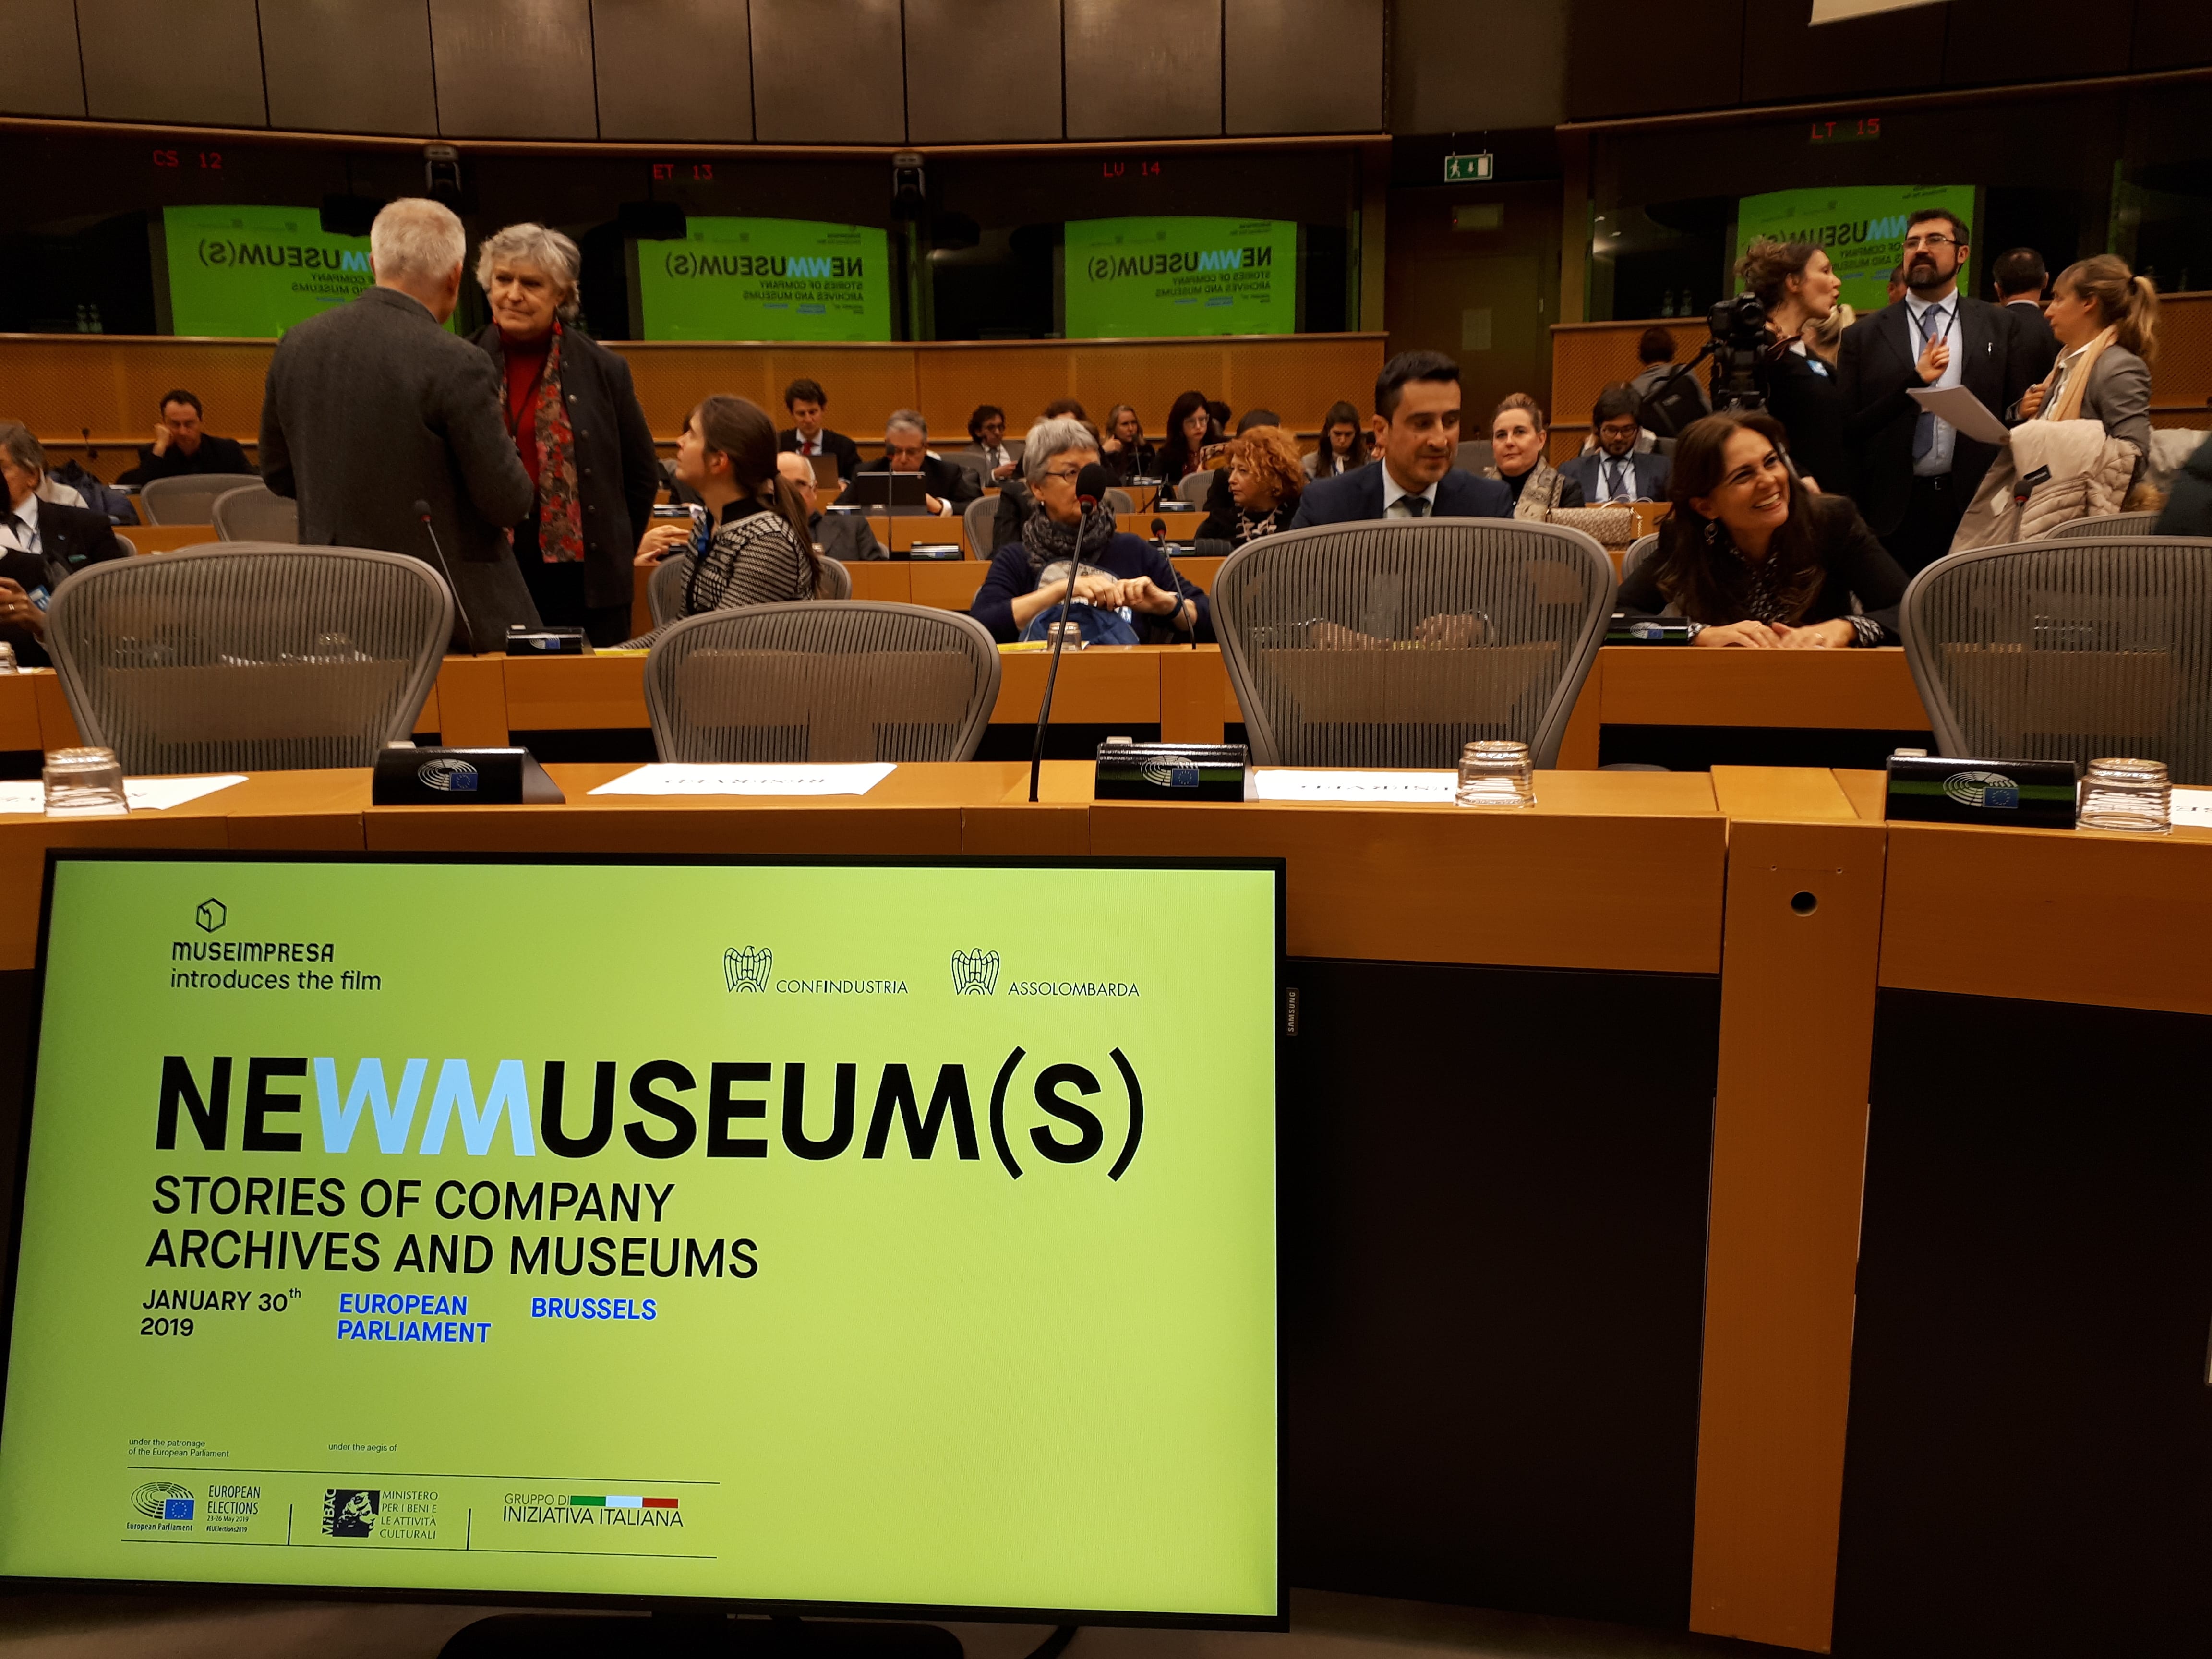 Museimpresa presenta il film documentario “NEWMUSEUM(S). Stories of company archives and museums”